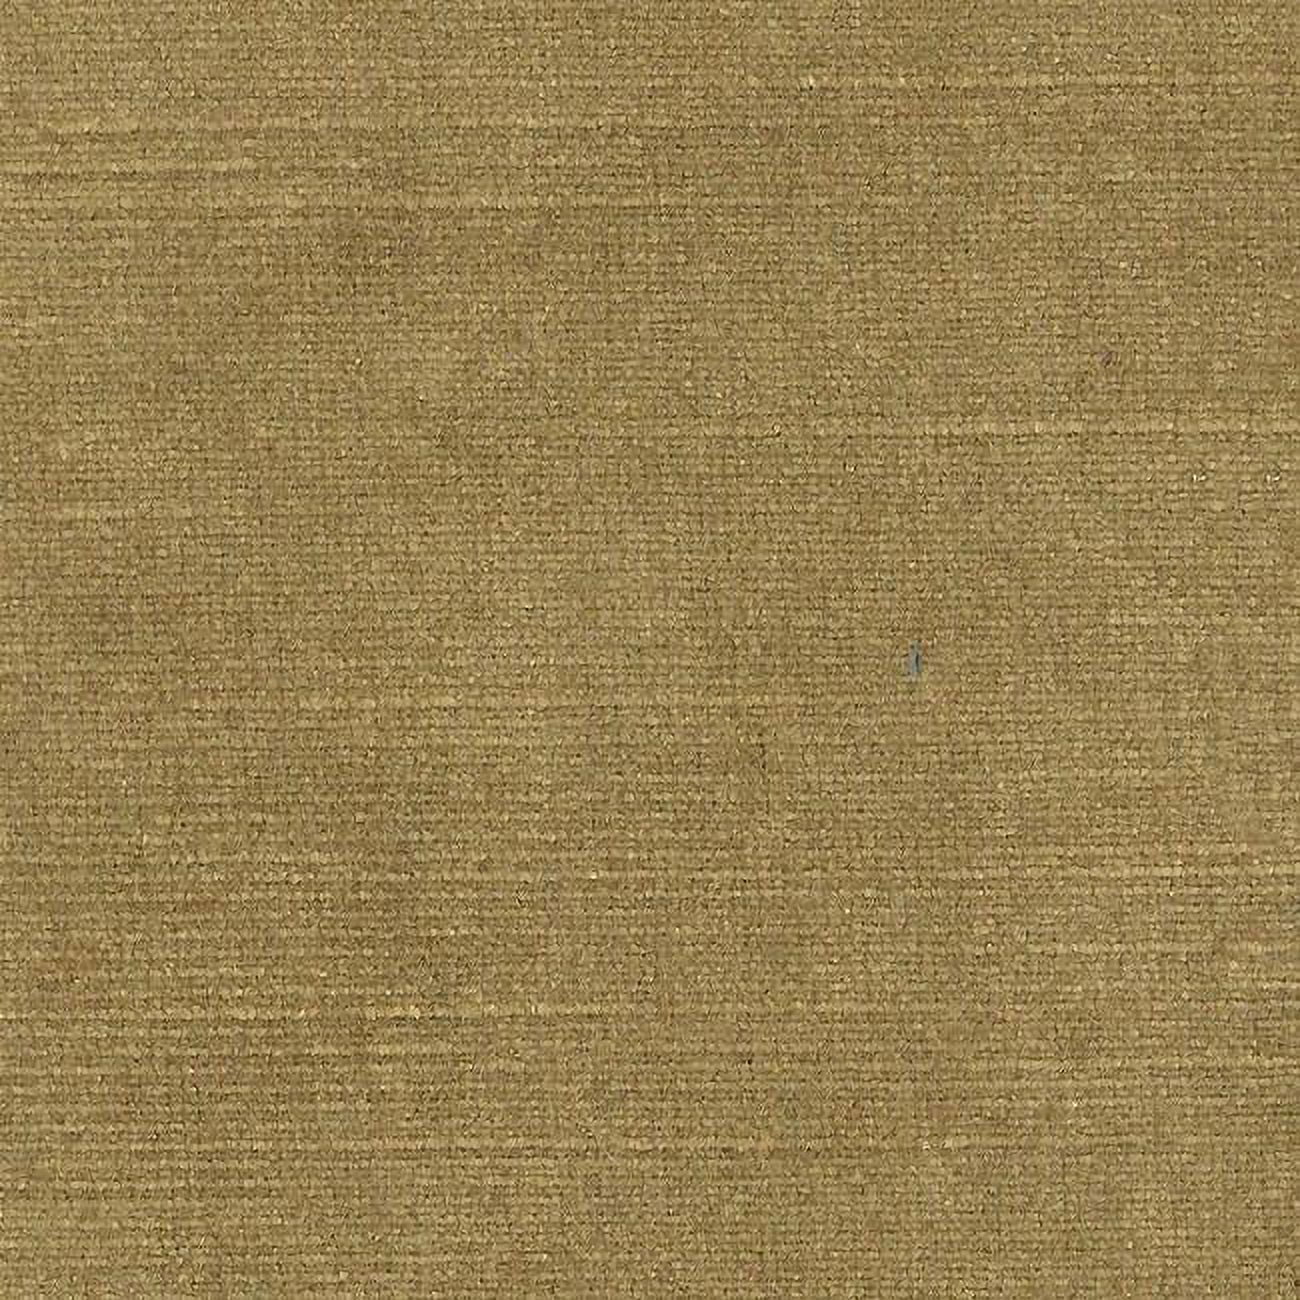 Picture of American Silk 3831 55 in. Brussels Beautifuly Curated Velvet Fabric Cloth, Fed Gold